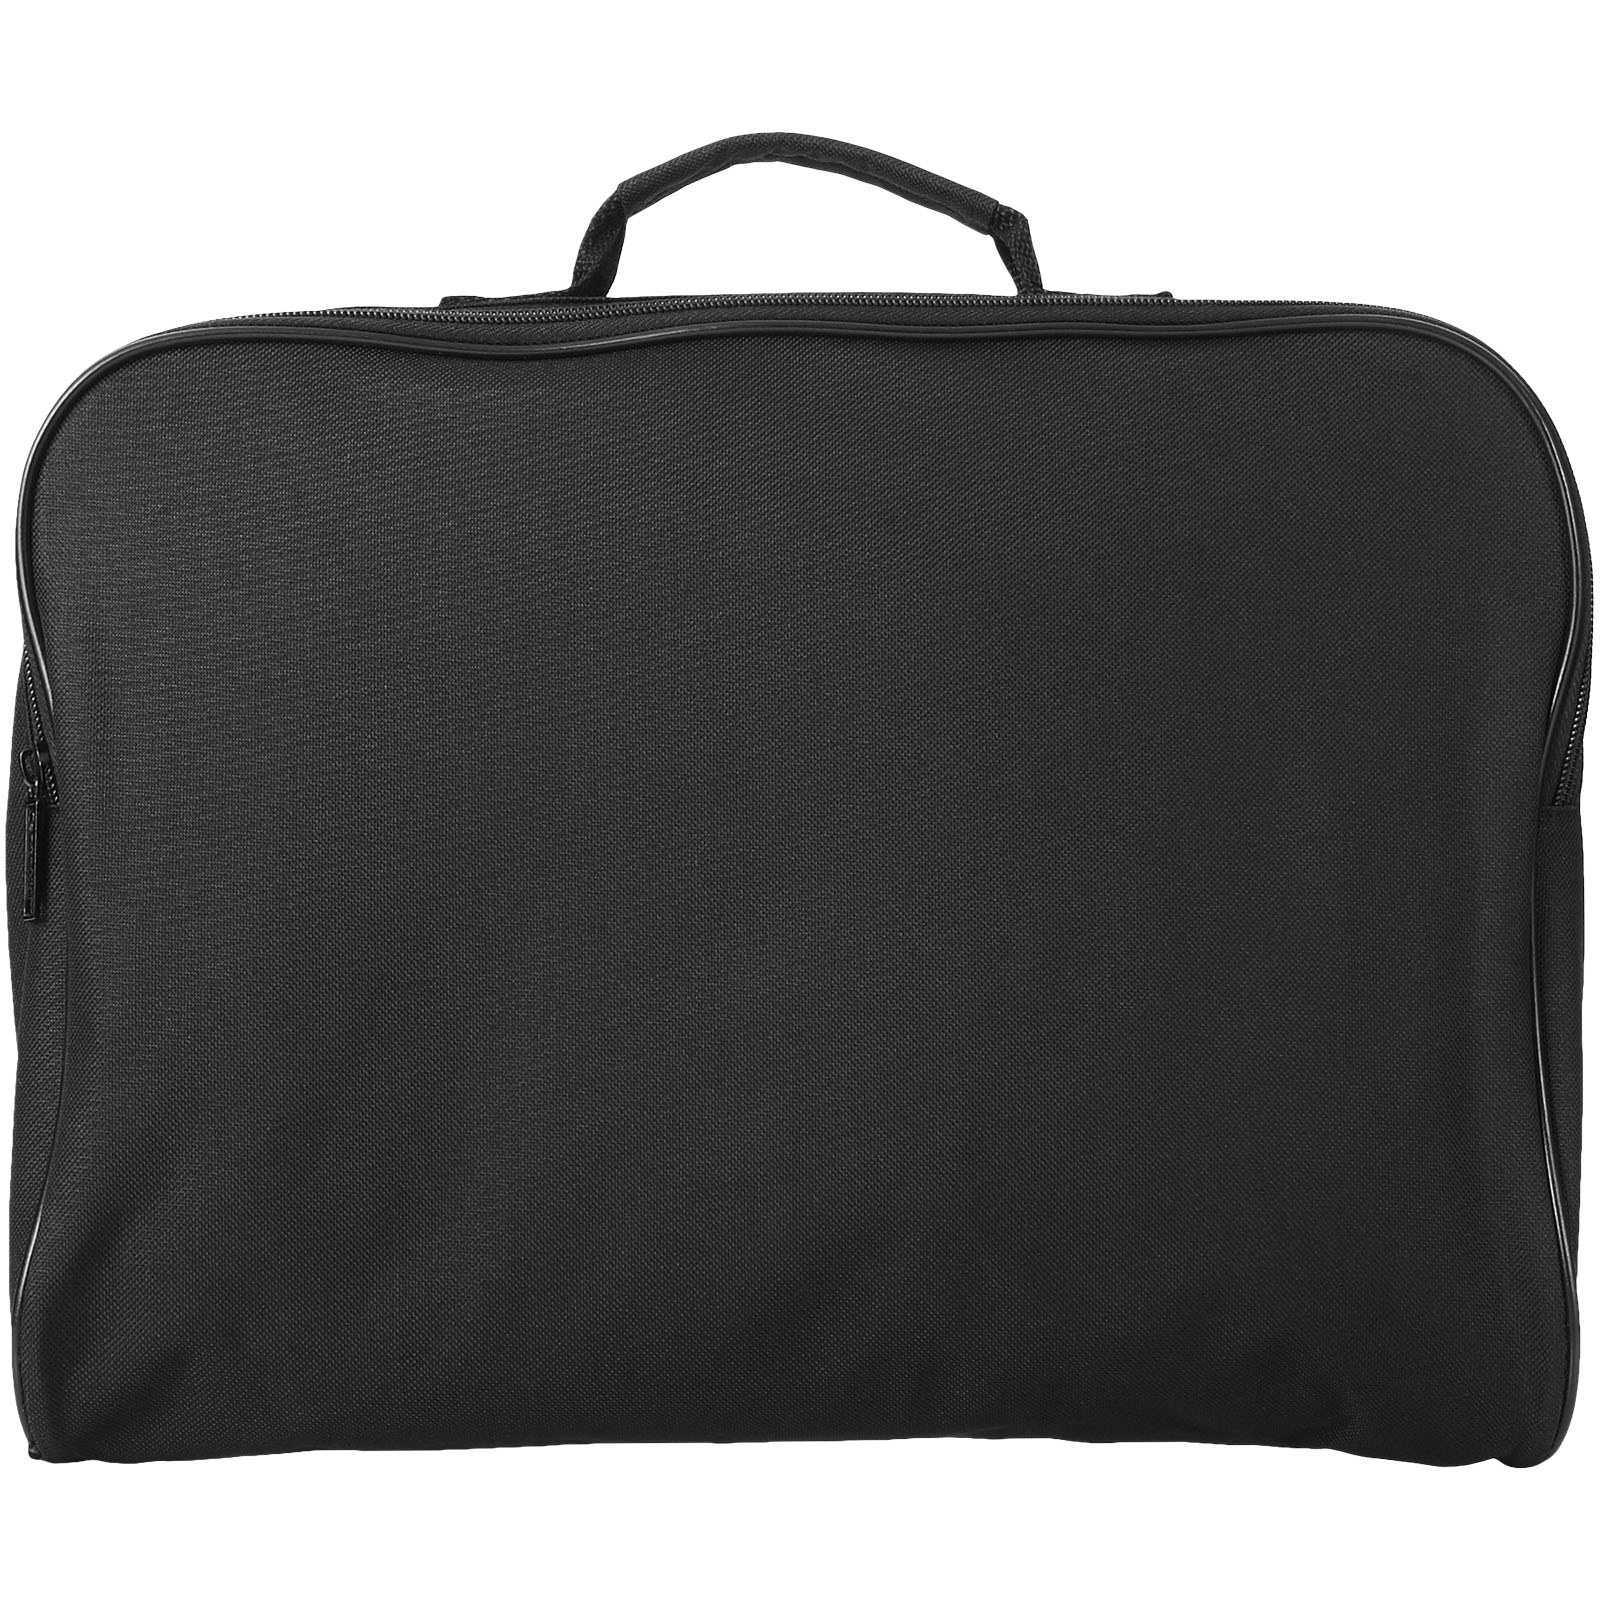 Advertising Conference bags - Florida conference bag 7L - 1